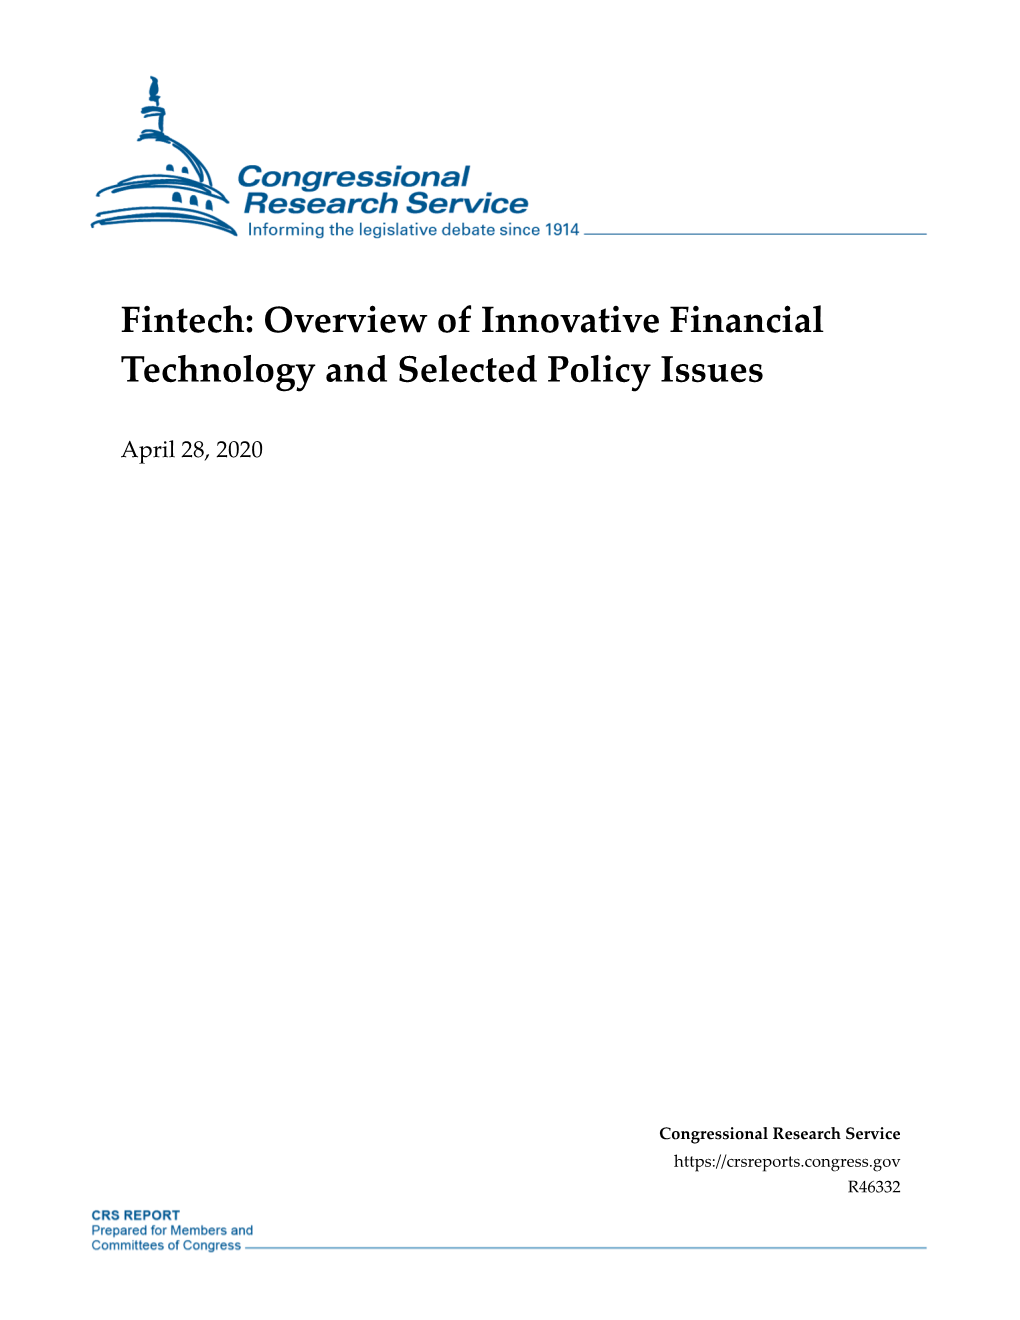 Overview of Innovative Financial Technology and Selected Policy Issues